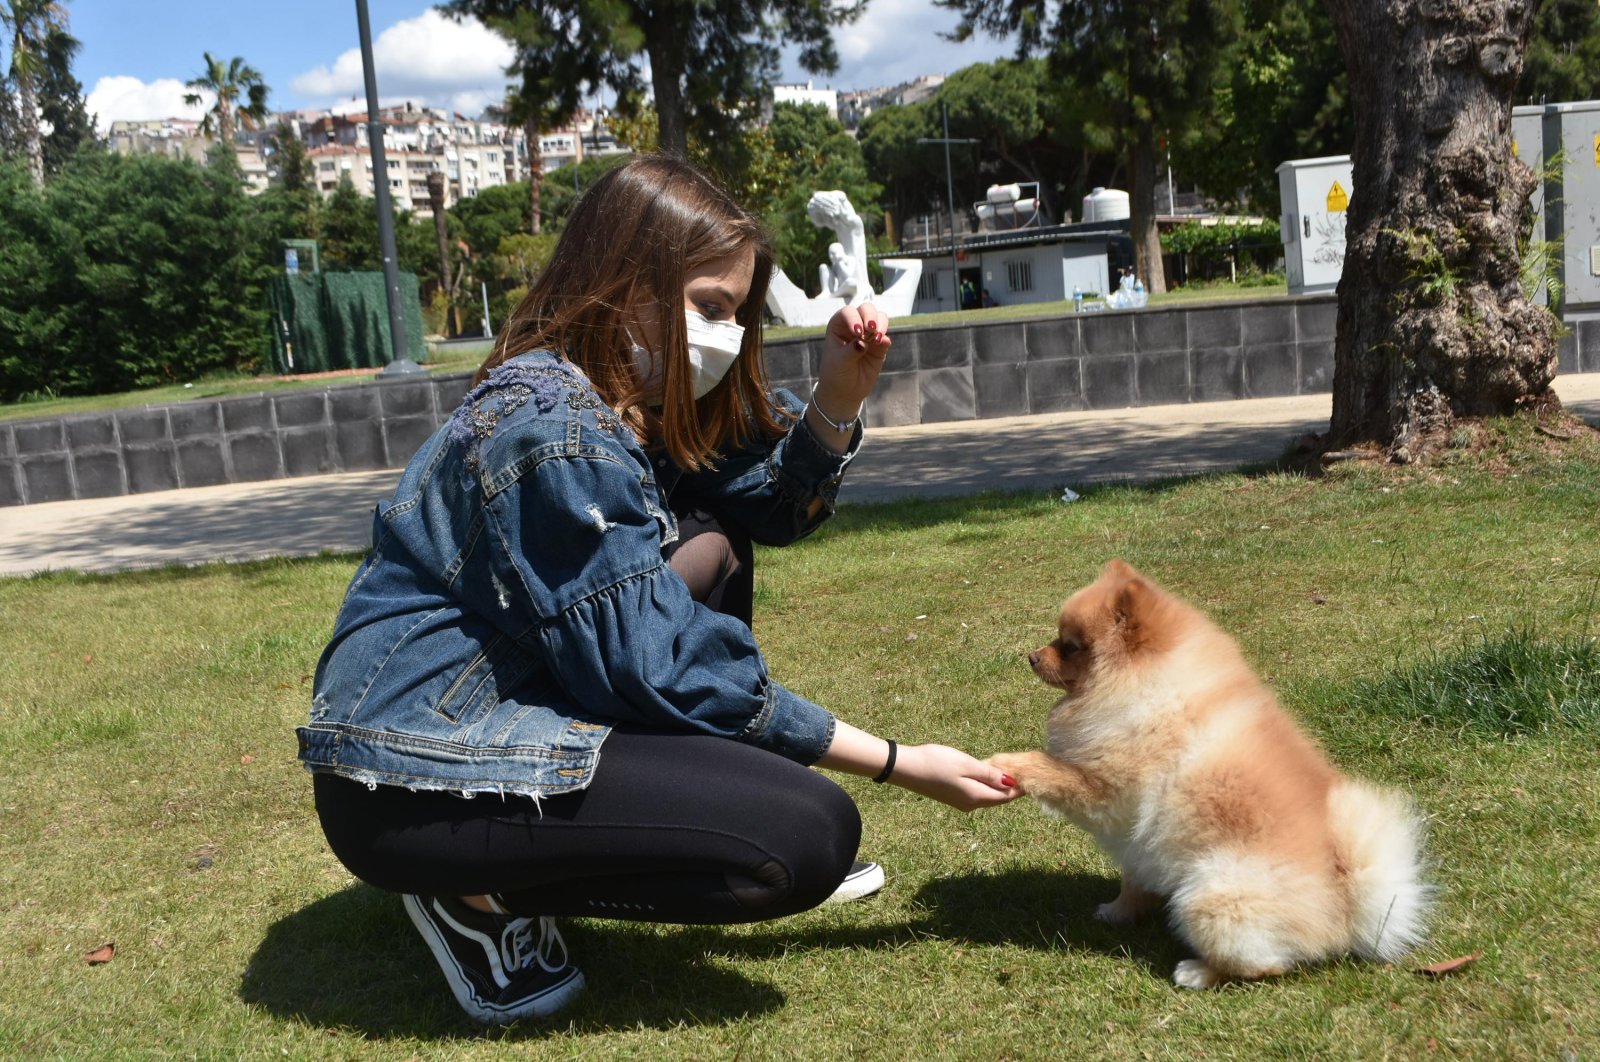 A woman plays with her dog in a park, Izmir, June 1, 2020. (DHA Photo)